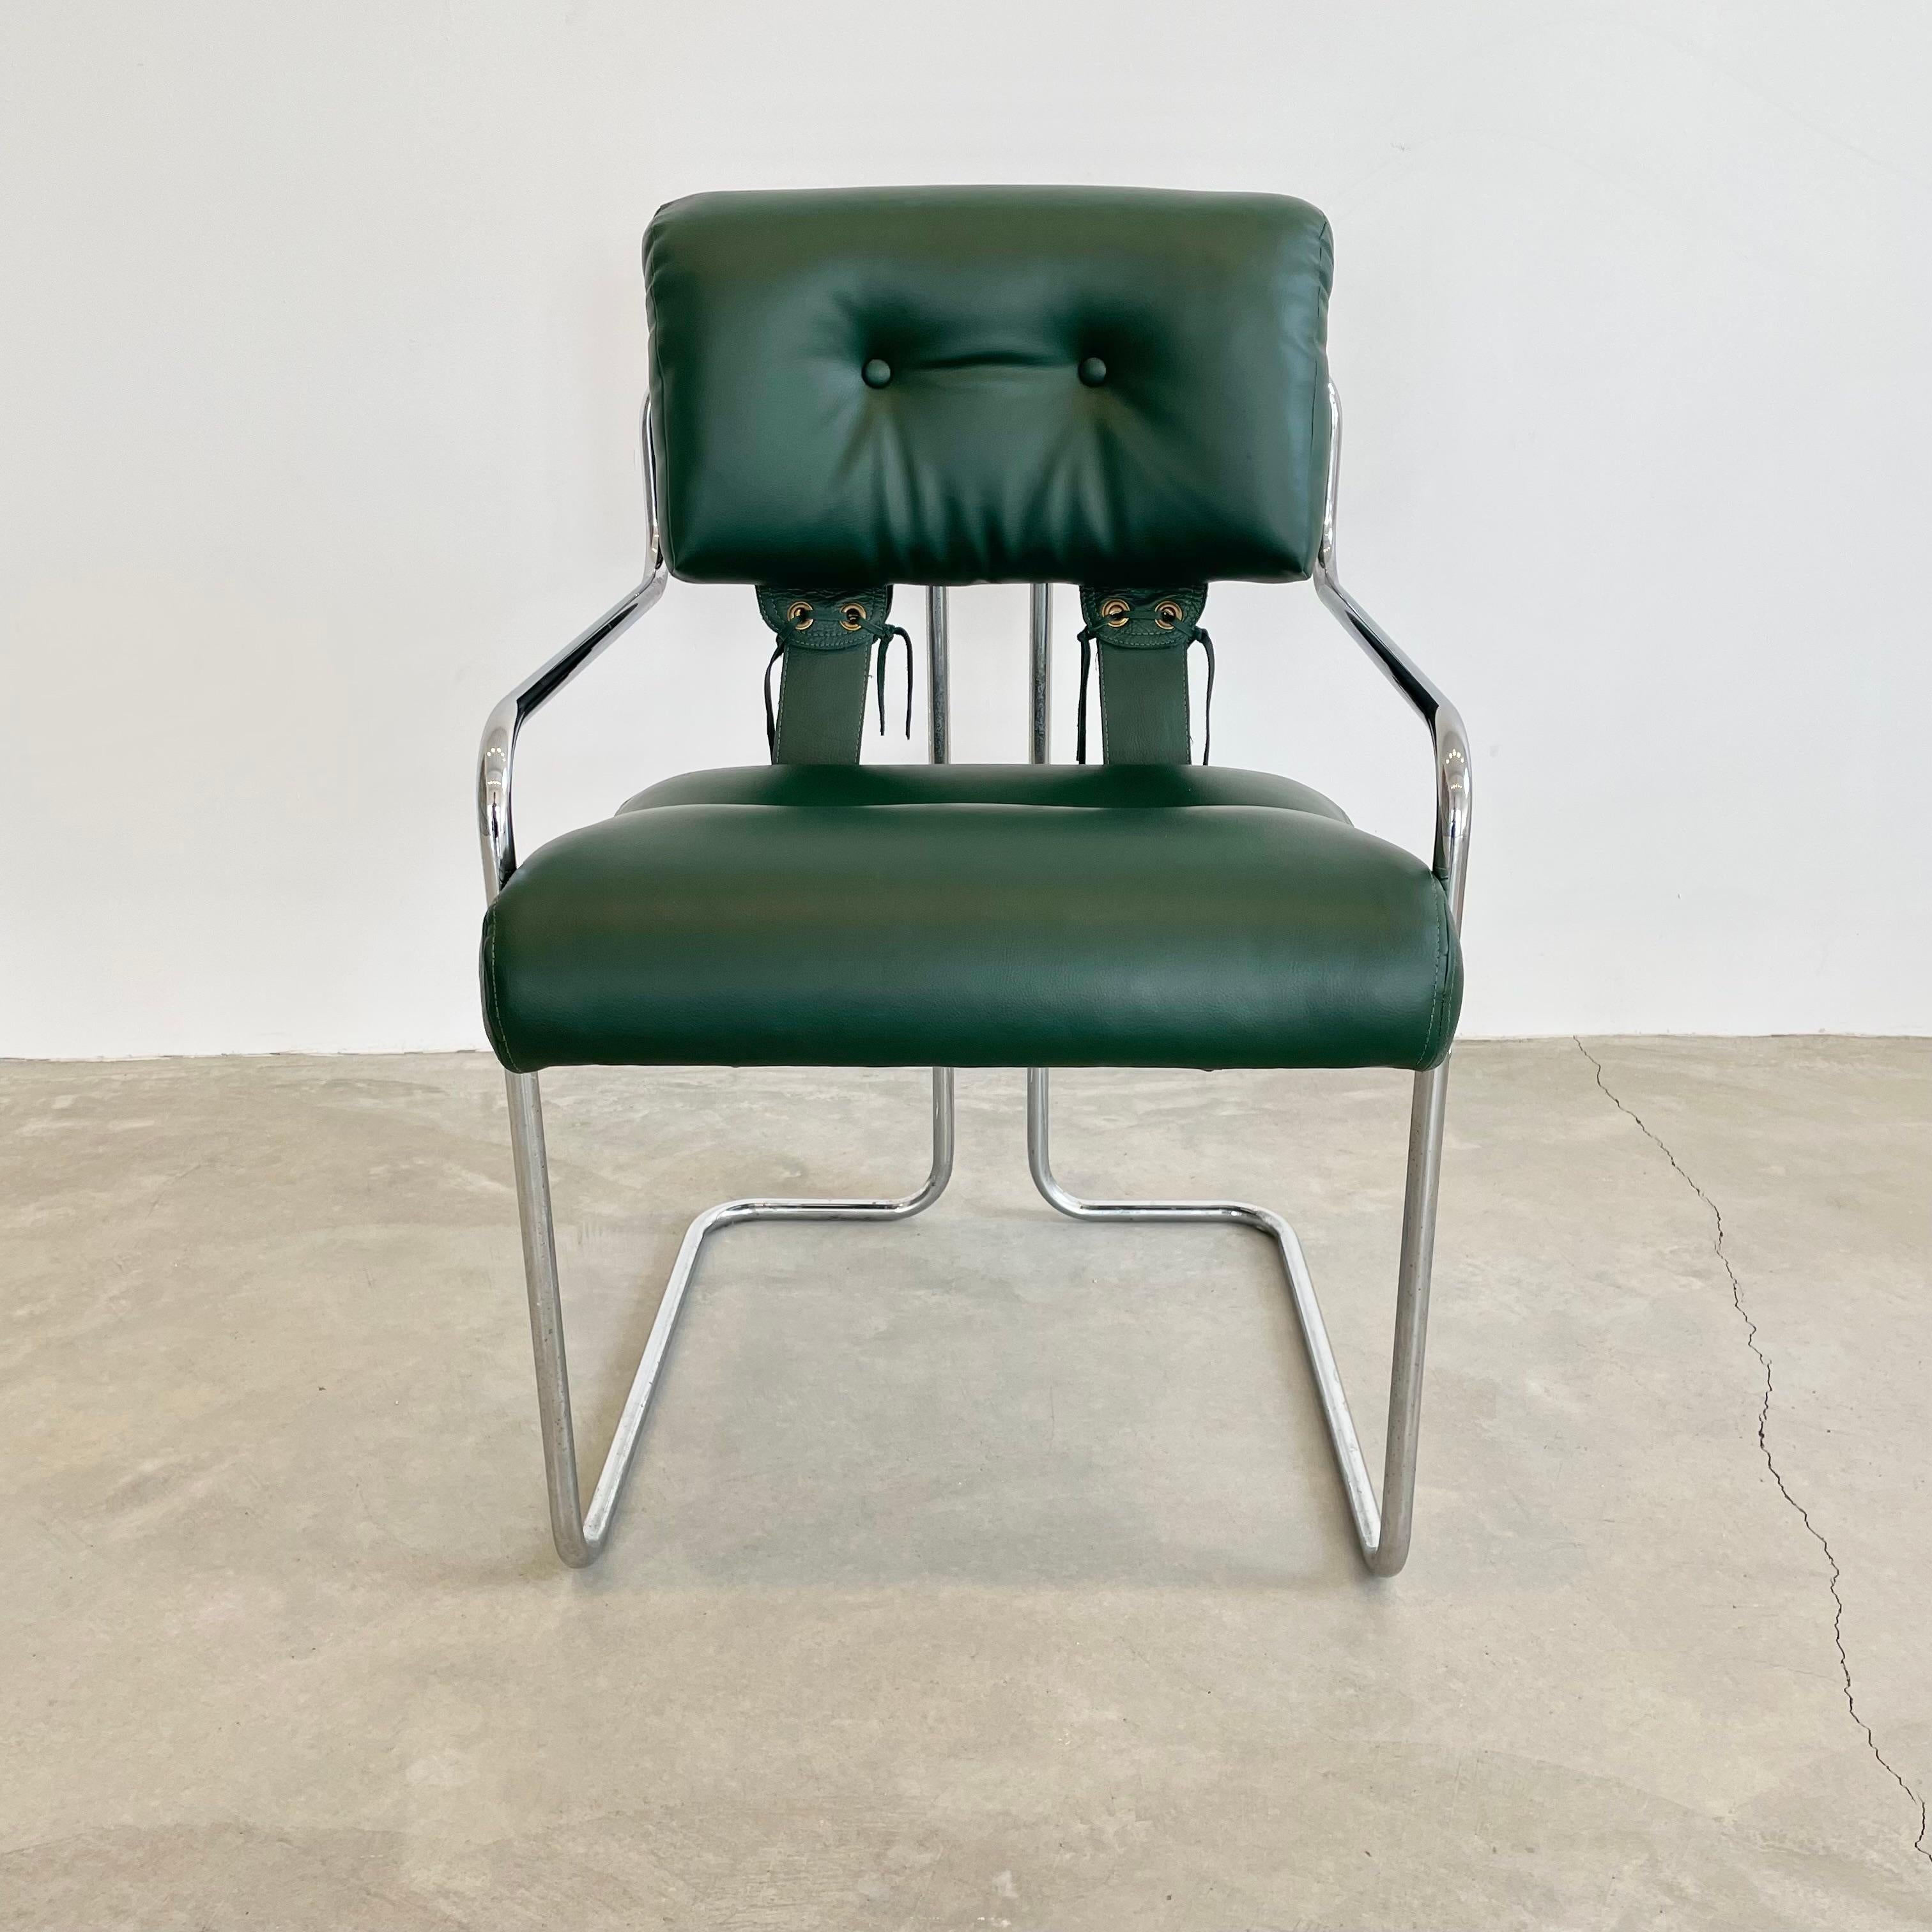 Italian Set of 7 'Tucroma' Chairs in Green by Guido Faleschini, 1970s Italy